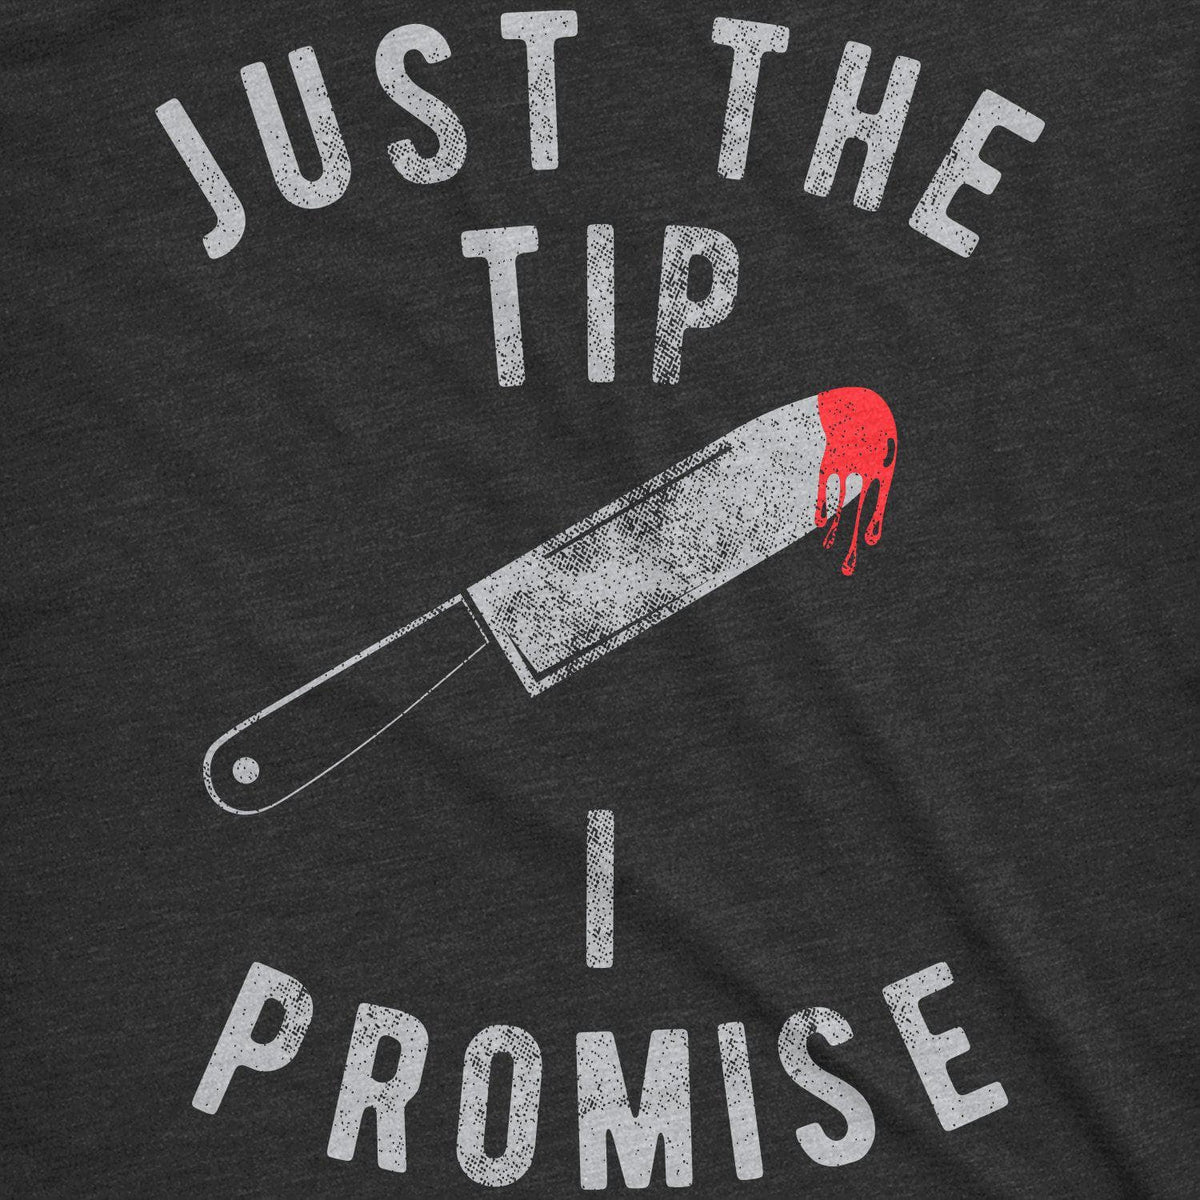 Just The Tip I Promise Men&#39;s Tshirt  -  Crazy Dog T-Shirts